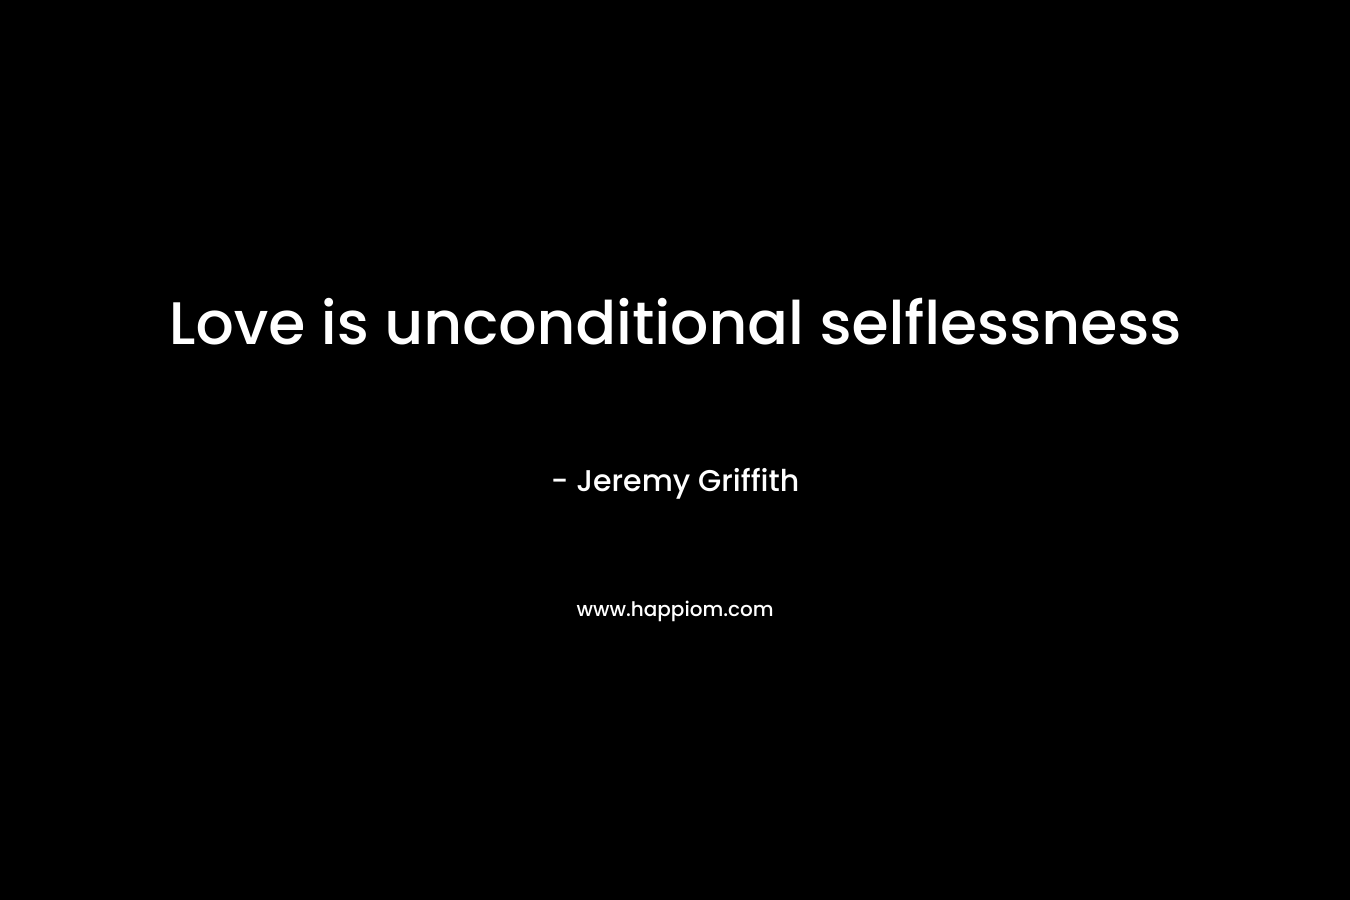 Love is unconditional selflessness – Jeremy Griffith